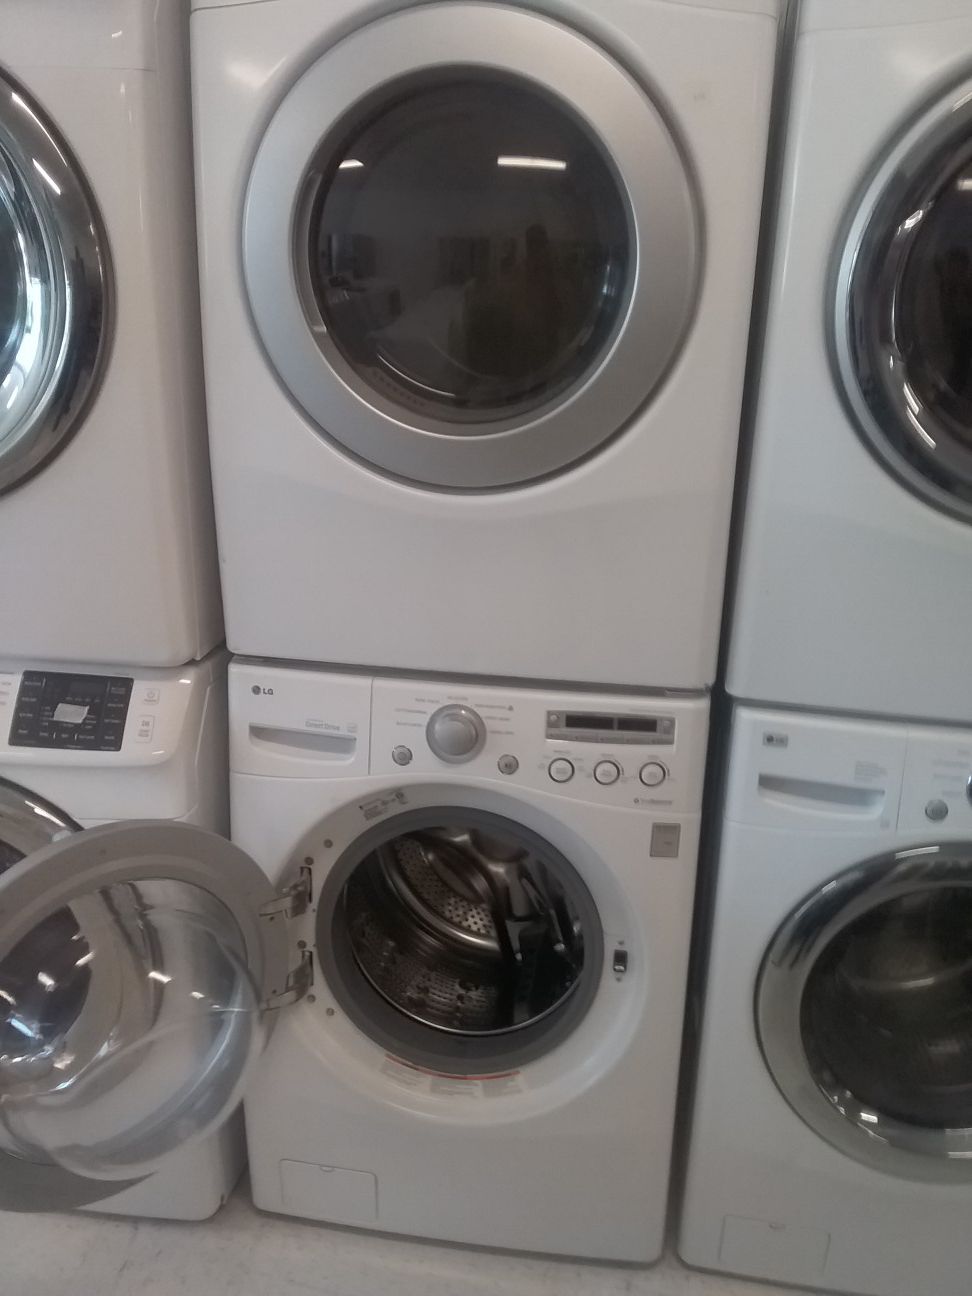 Whirlpool washer and dryer used good condition 90days warranty